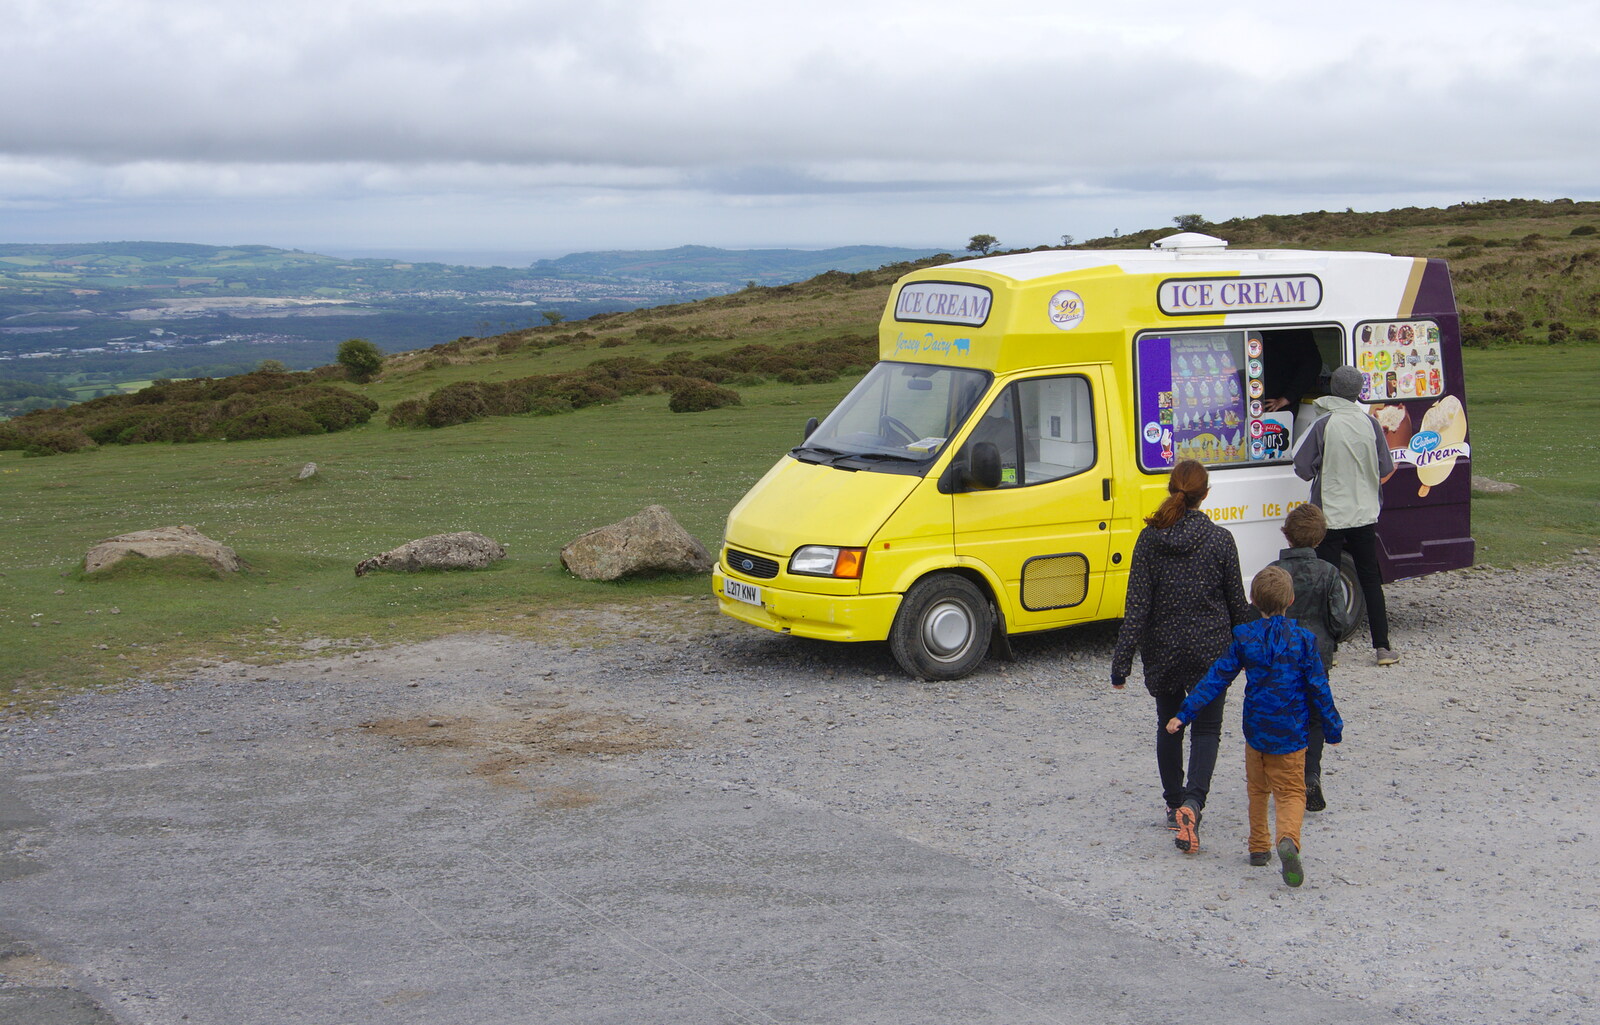 It's time for an ice cream from The Tom Cobley and a Return to Haytor, Bovey Tracey, Devon - 27th May 2019